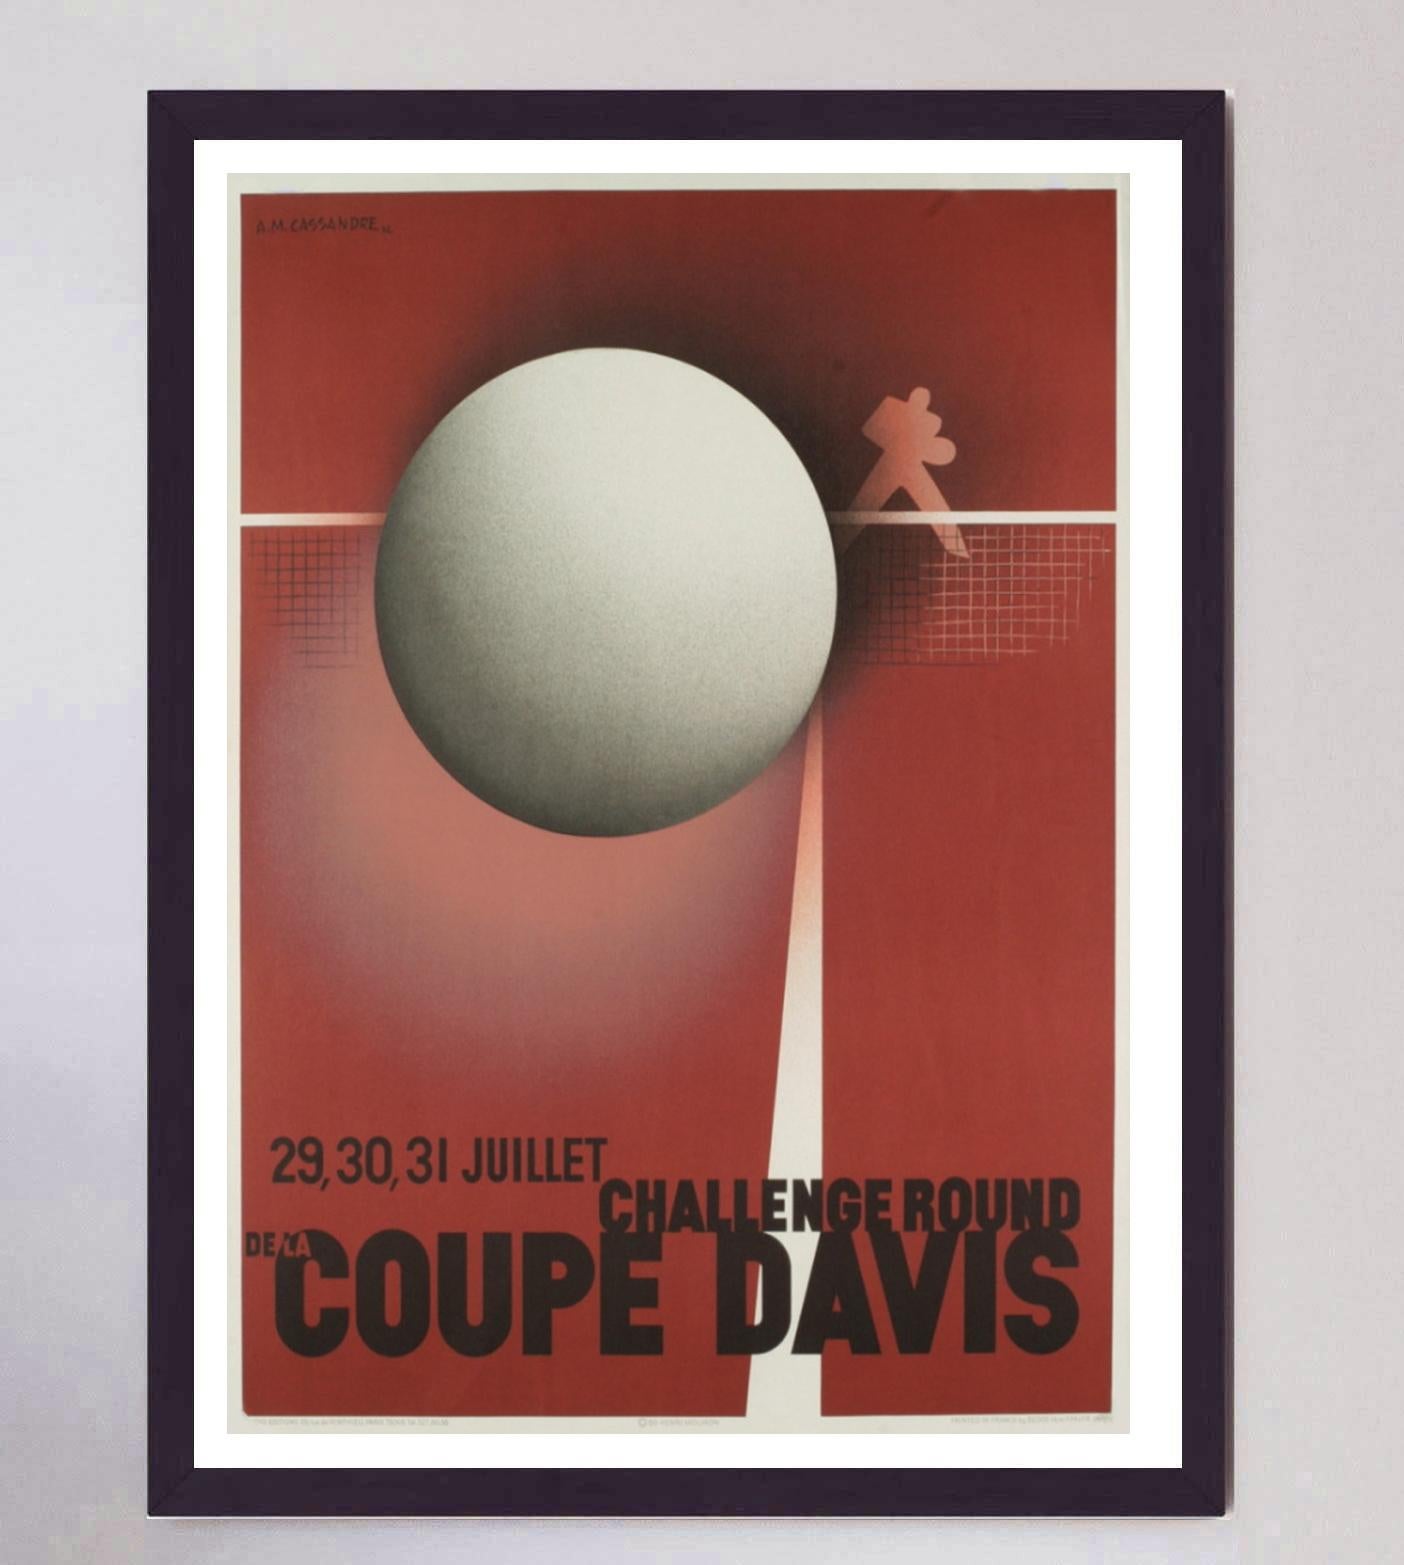 1980 Coupe Davis - A.M. Cassandre Original Vintage Poster In Good Condition For Sale In Winchester, GB